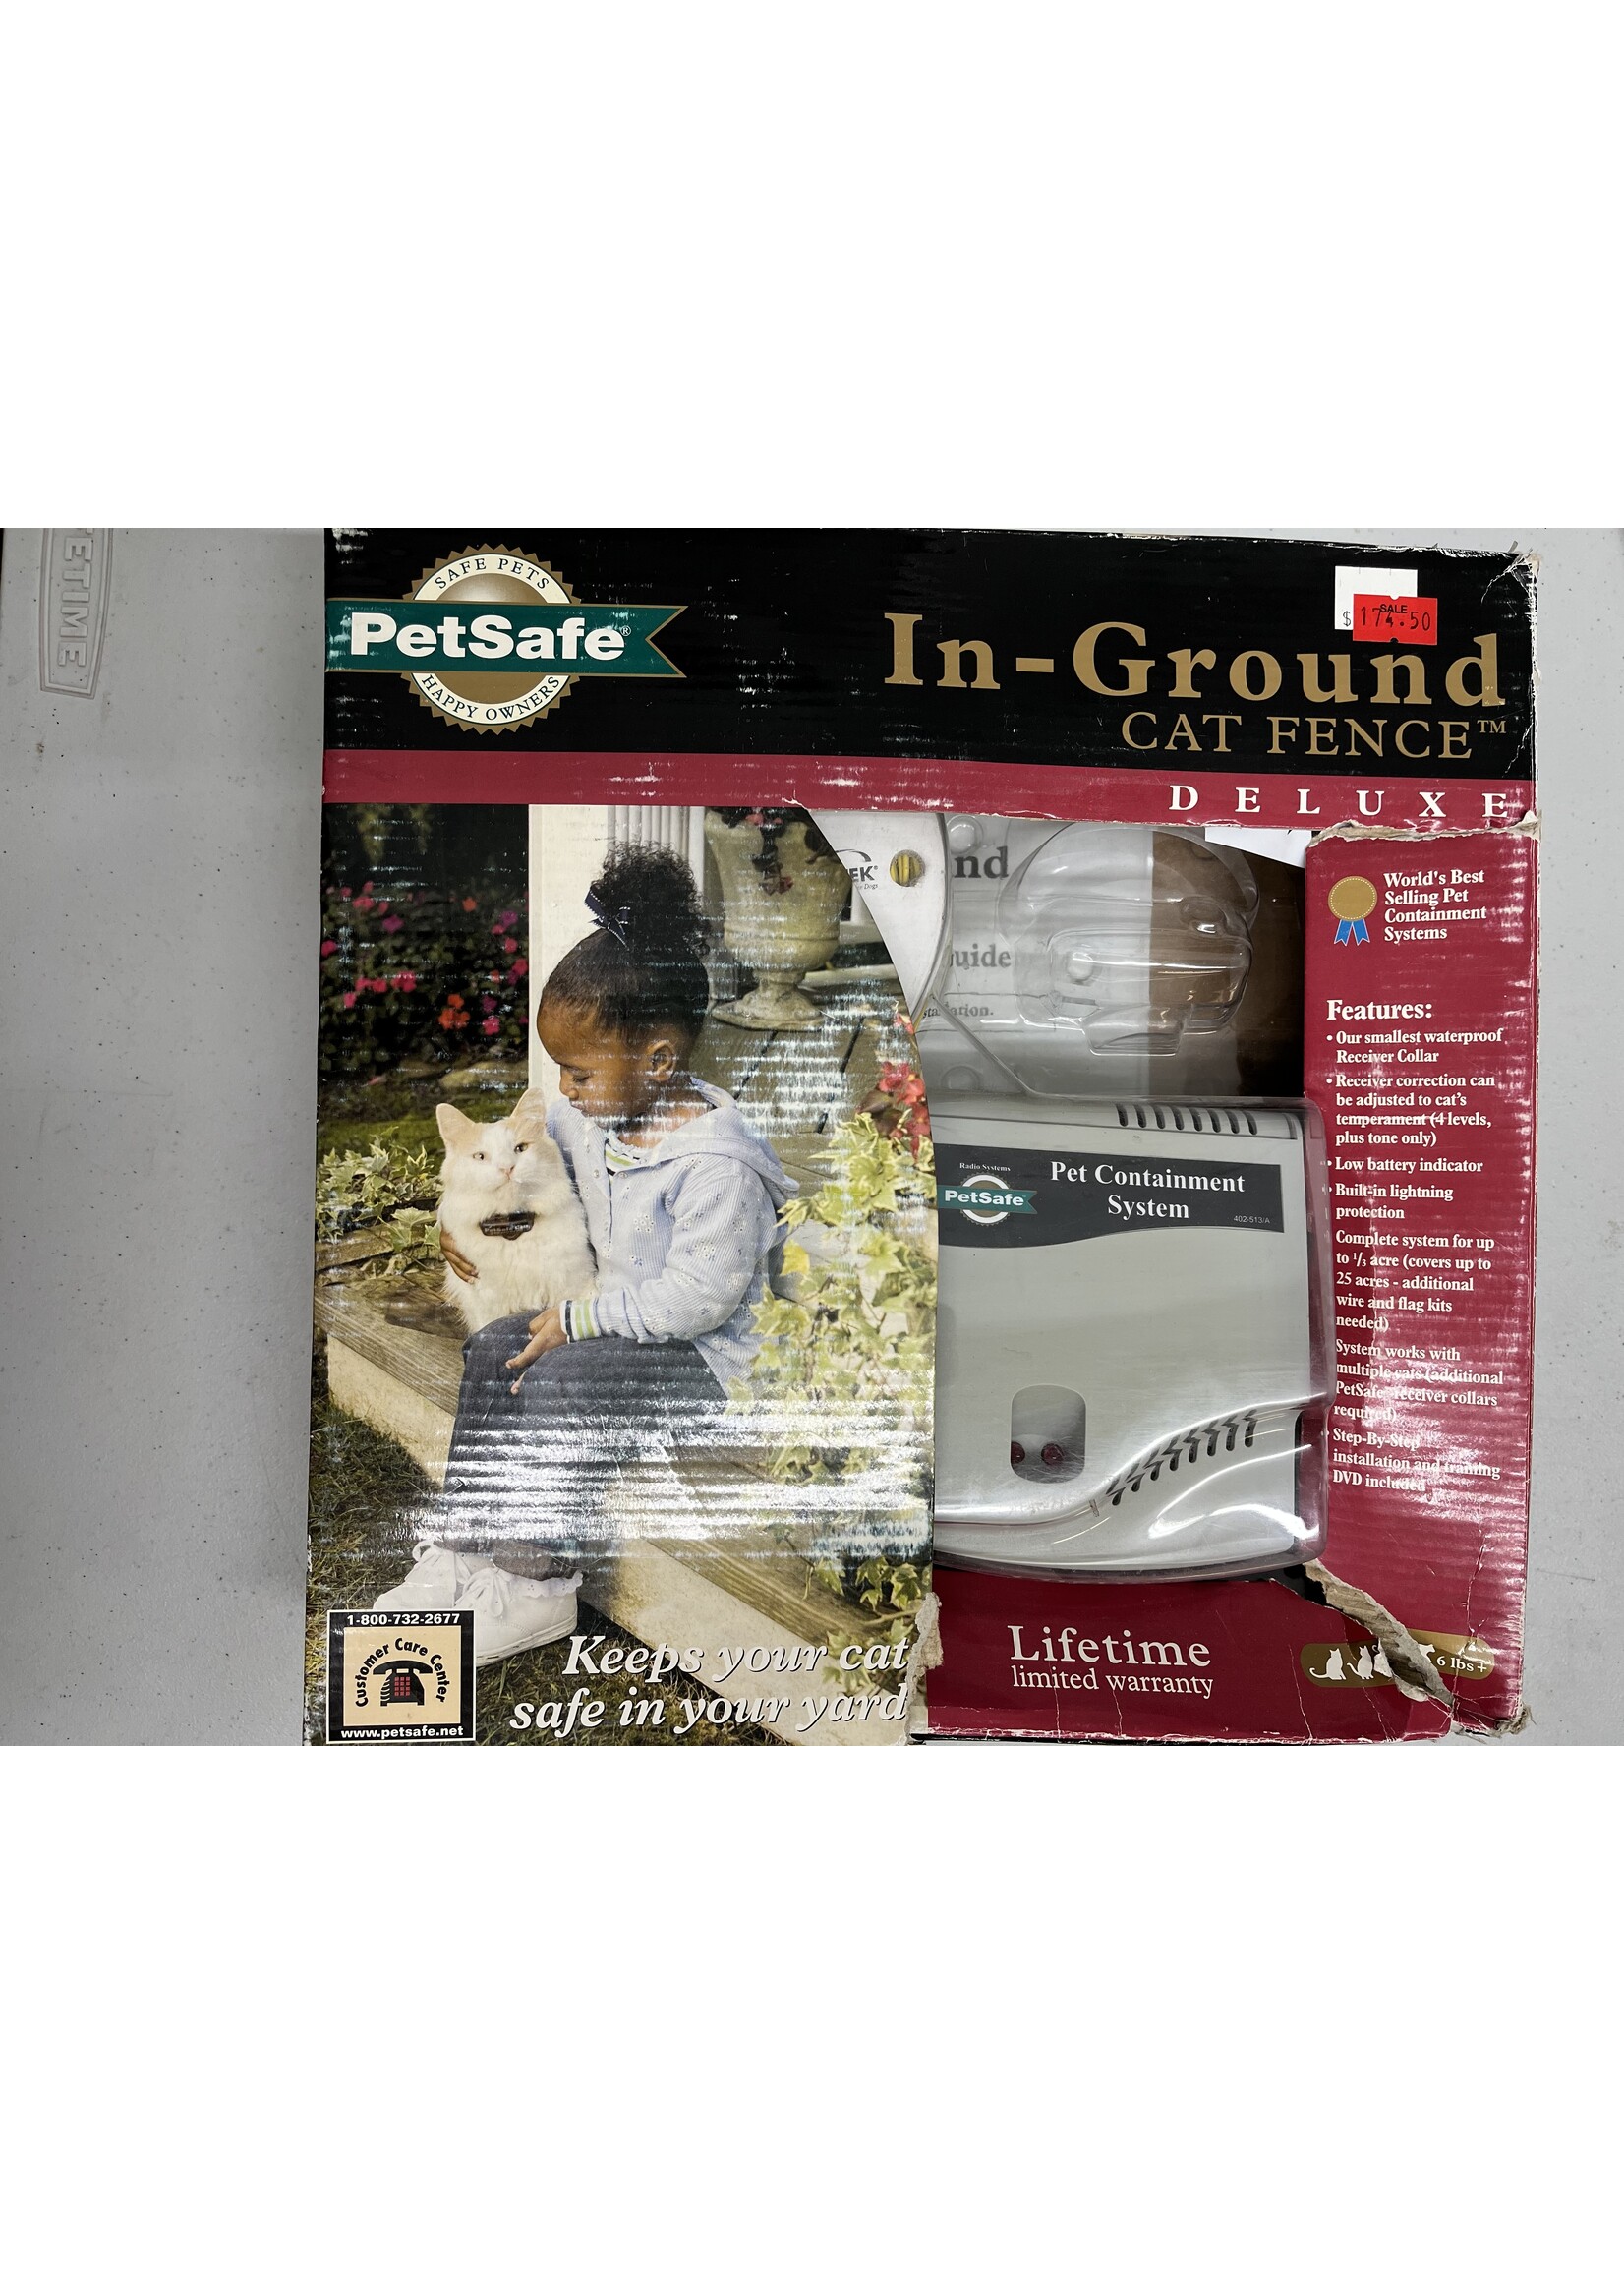 Petsafe Petsafe In-Ground Cat Fence Deluxe System